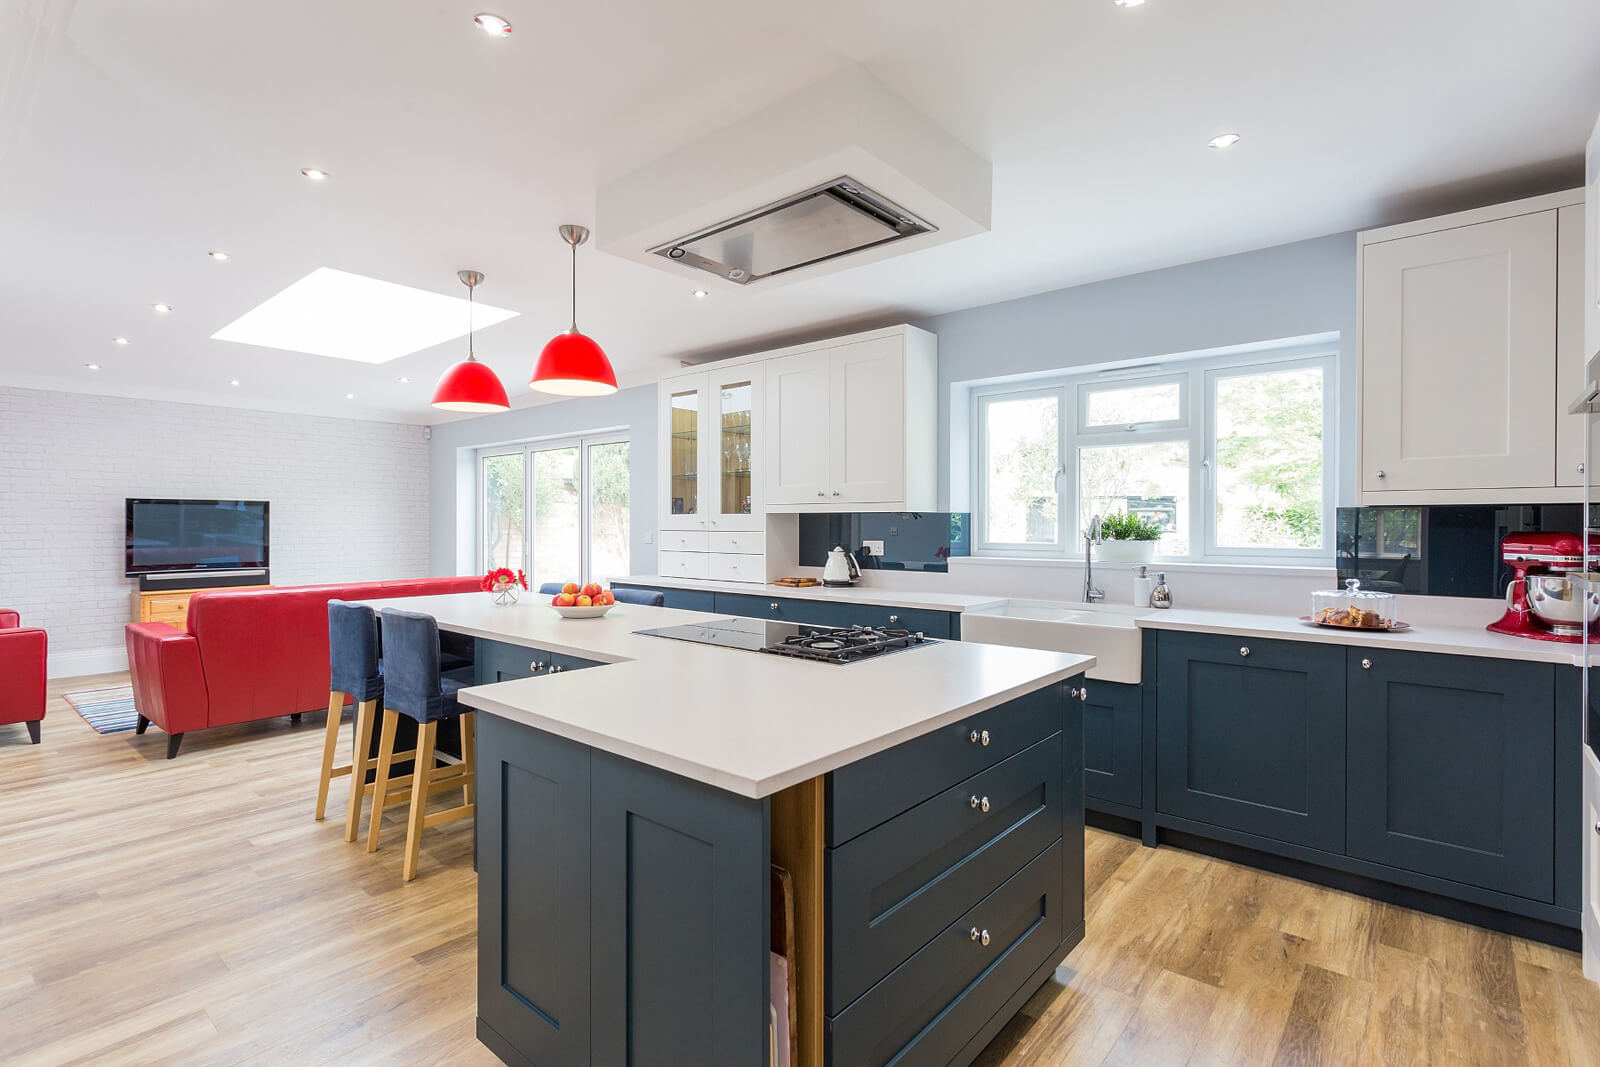 C&C kitchens Hertfordshire - Fitzroy painted shaker in Chalk and Harforth Blue.